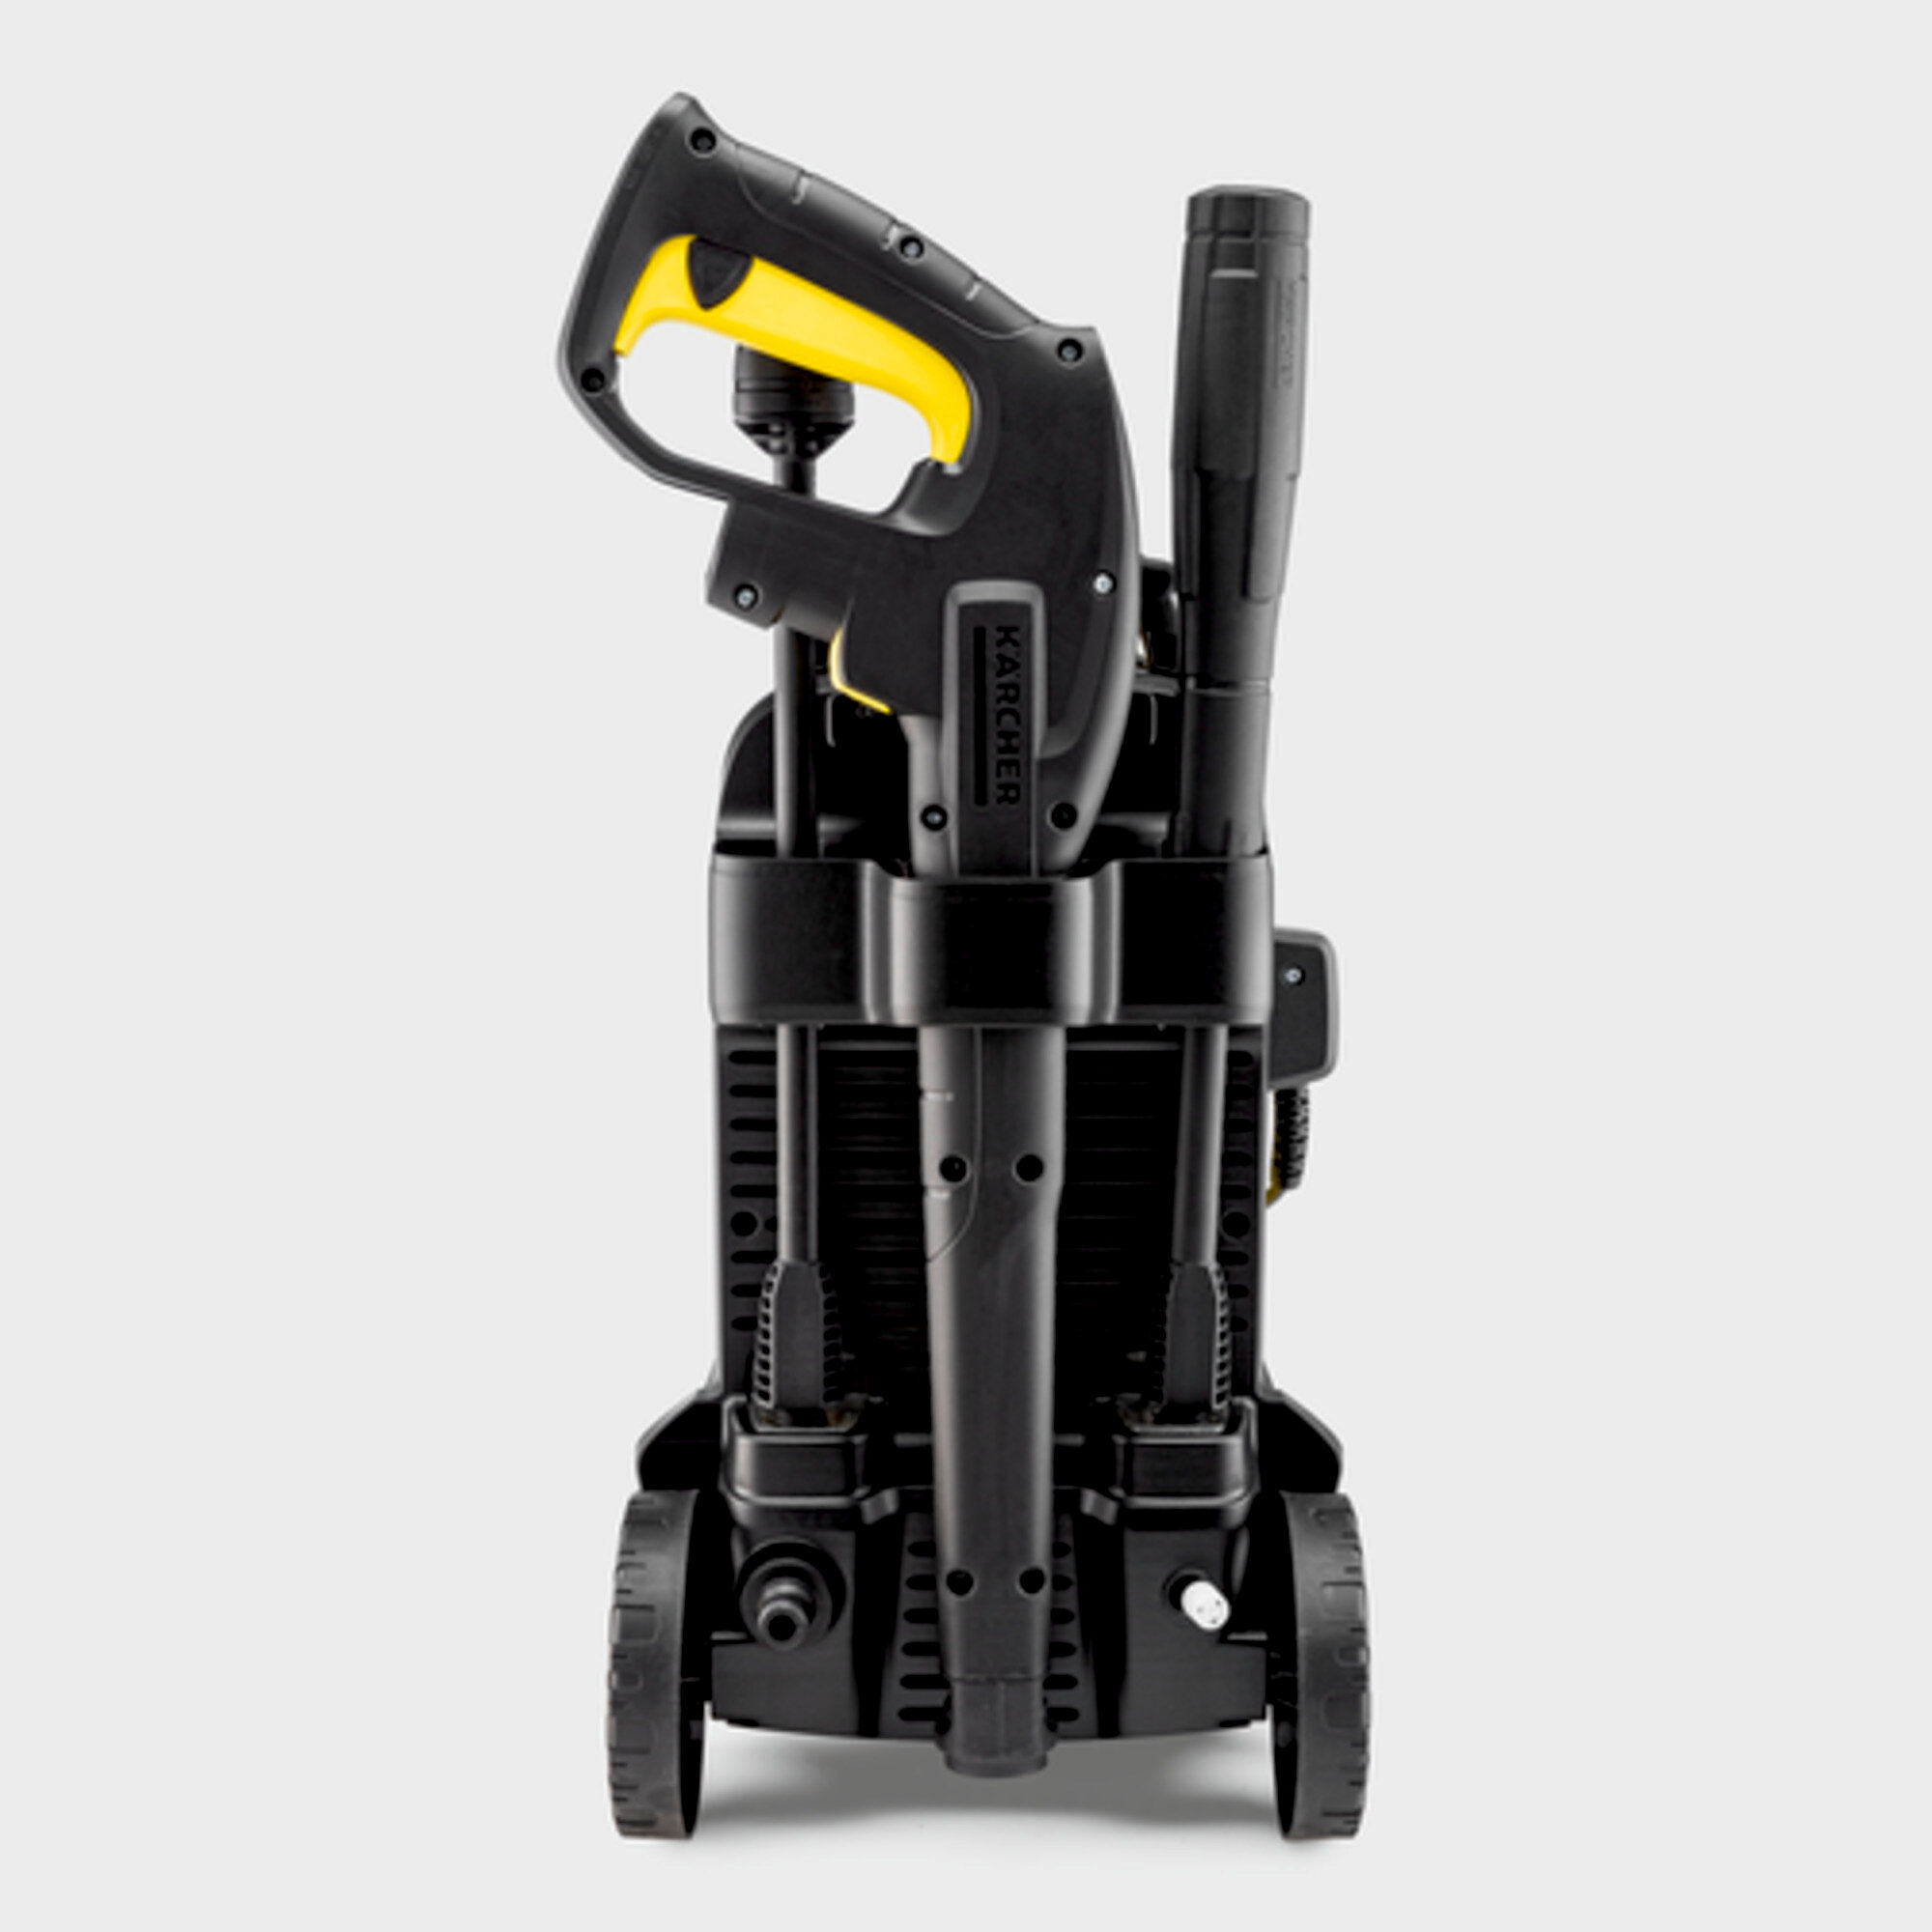 Pressure washer K 4 Compact UM: Integrated accessory storage on the device